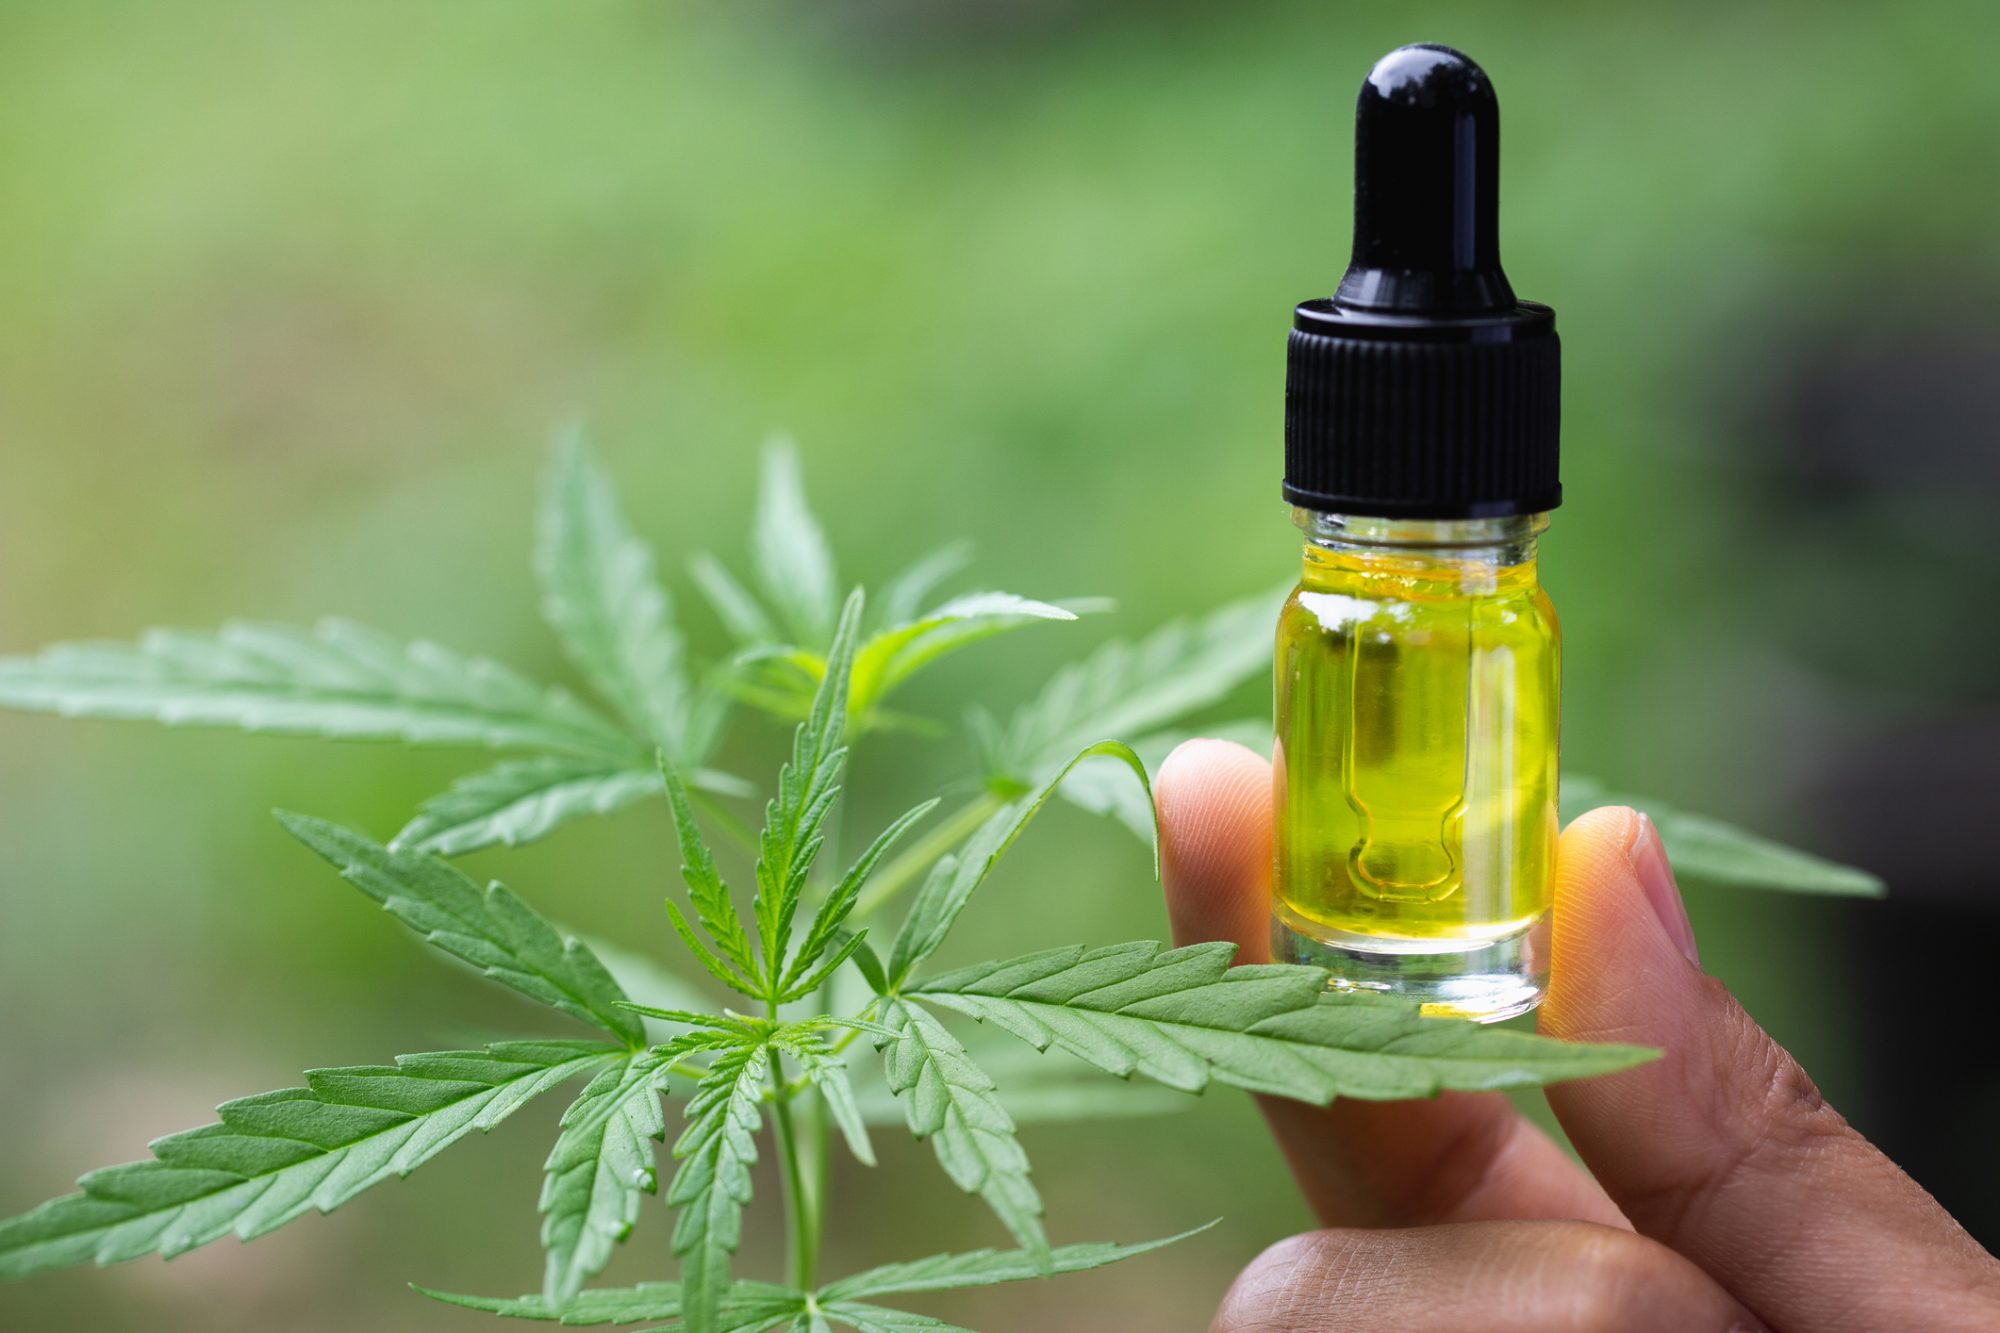 Why Mix CBD Oil With A Liquid?